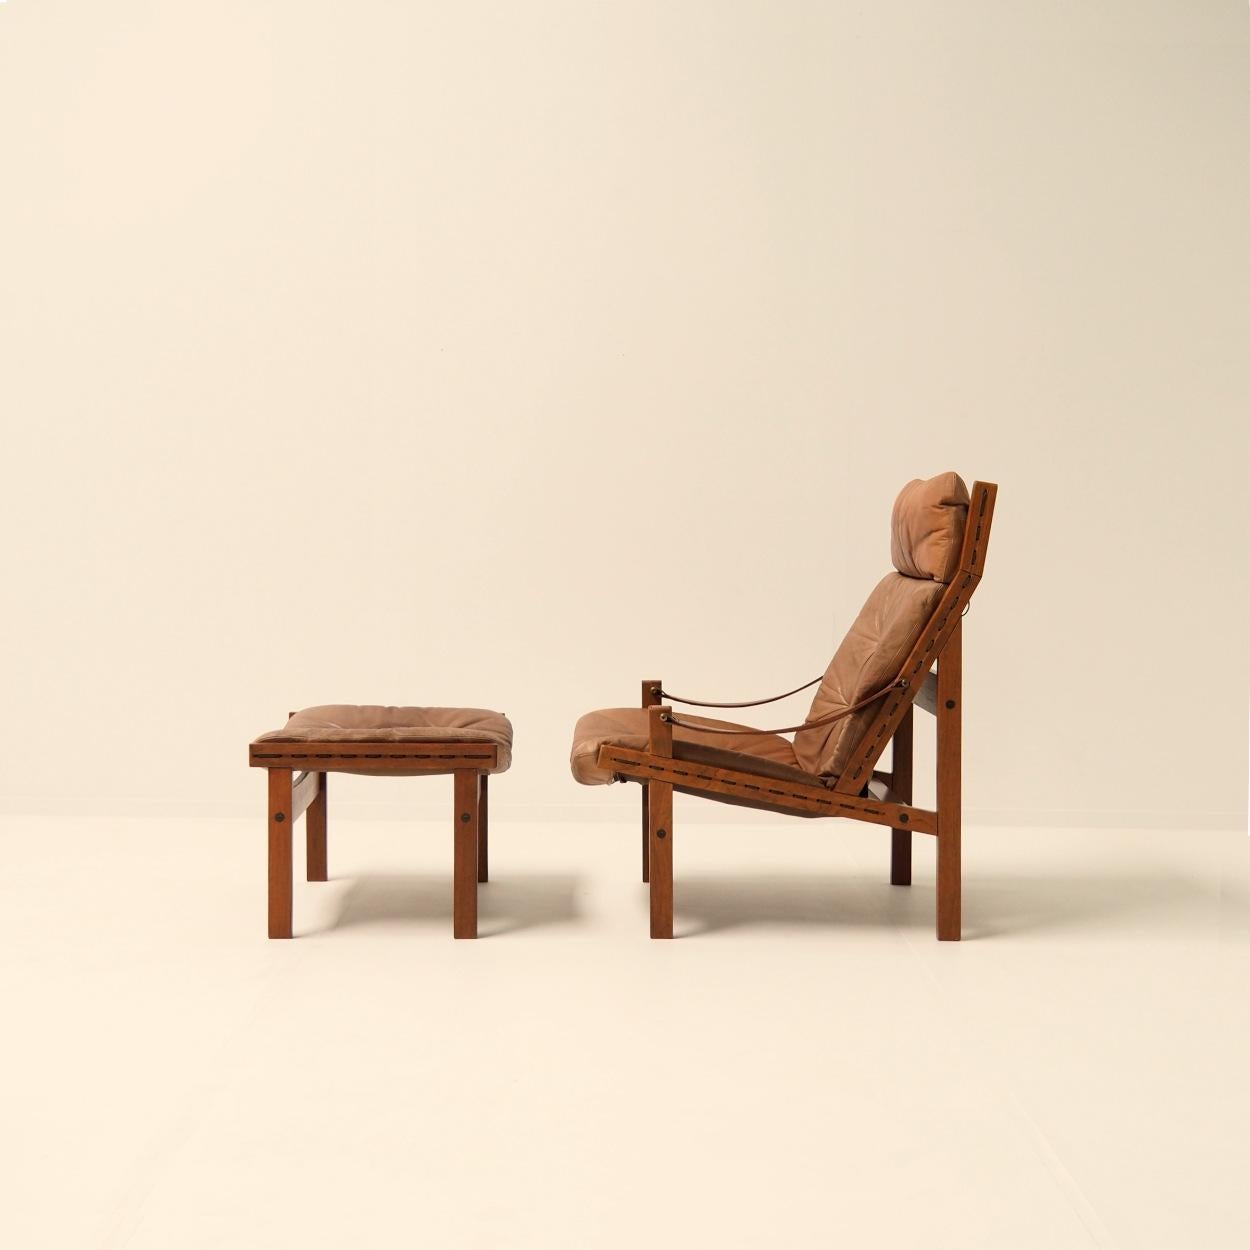 ‘Hunter Lounge Chair’ with Original Ottoman by Torbjørn Afdal, Norway 1962 In Good Condition For Sale In Beerse, VAN